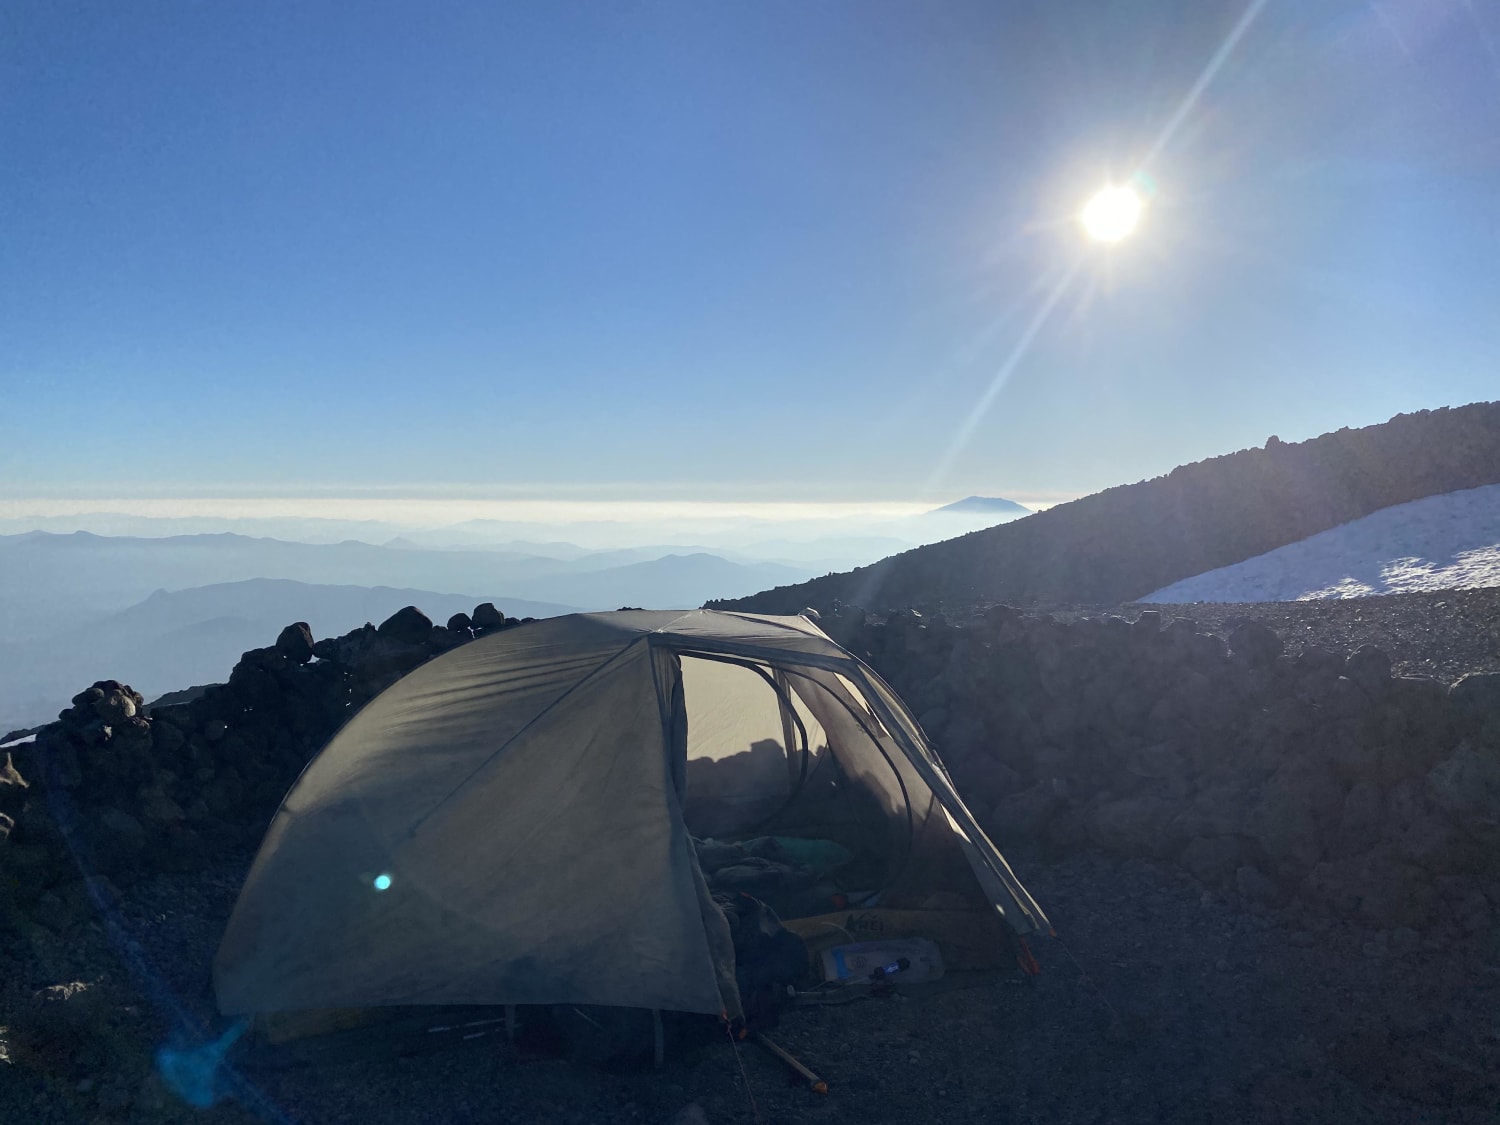 Climbed up and stayed the night at Lunch Counter (9,400 ft) on Mt. Adams. The mountain you can peaking over the clouds is Mt. Saint Helens.